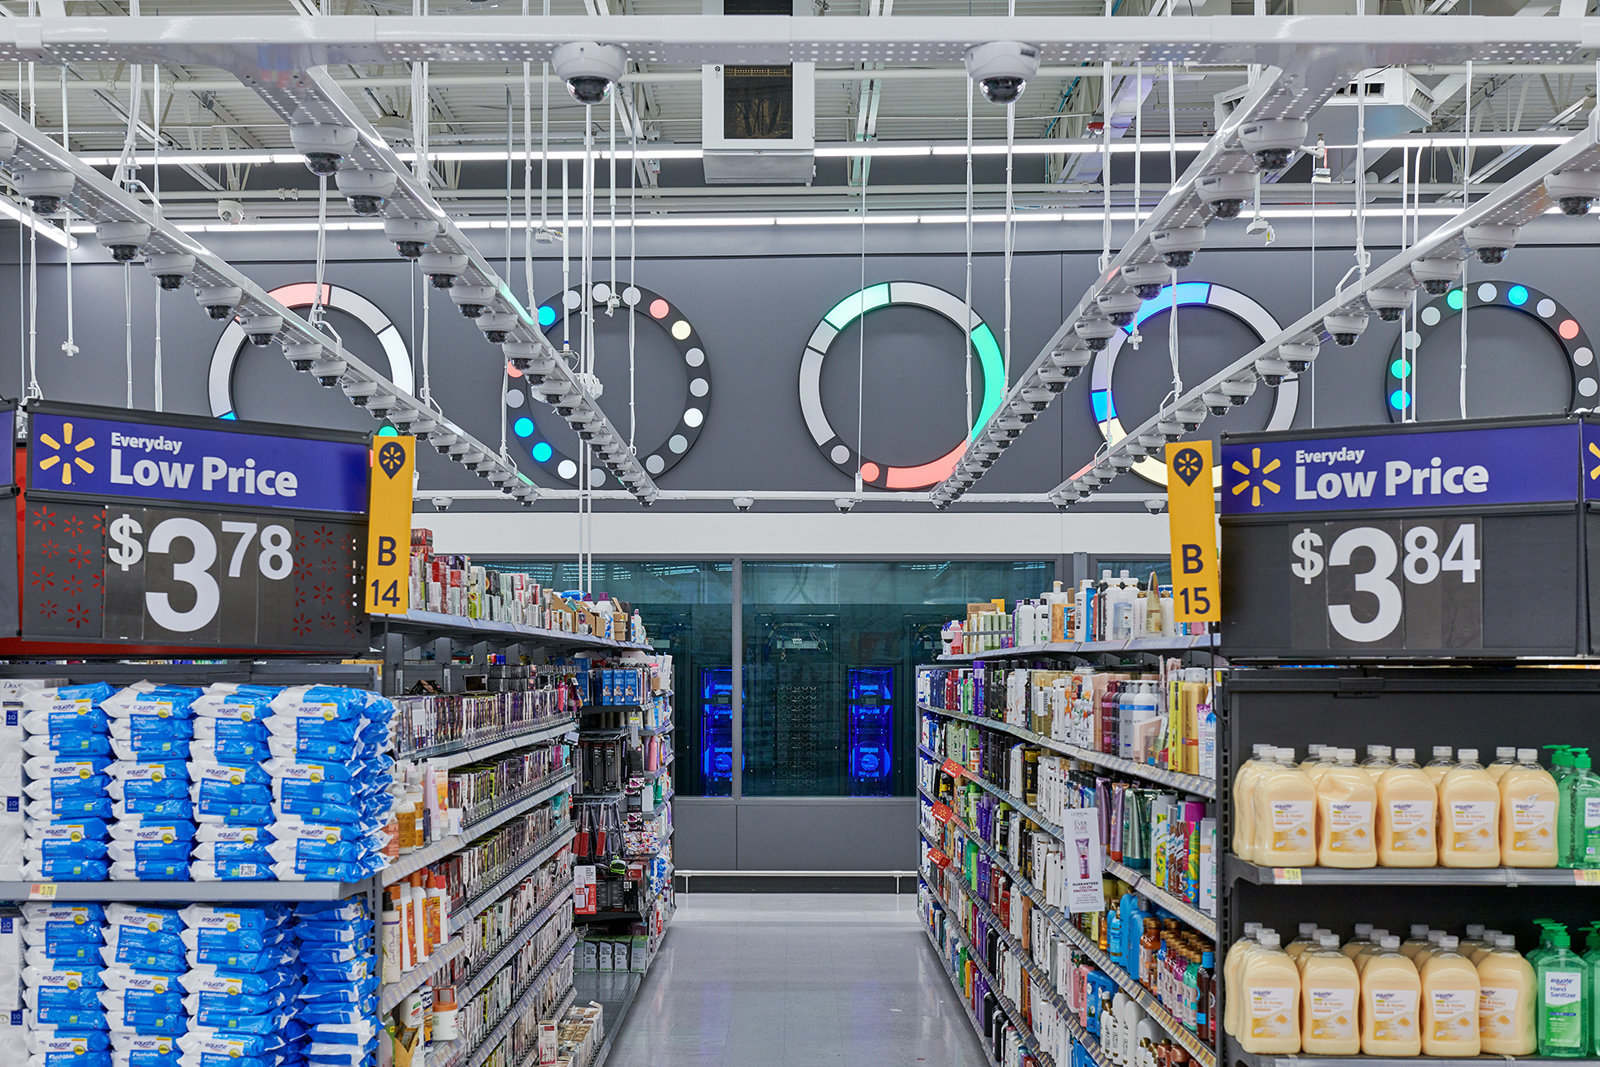 There are AI-enabled cameras above almost all the products in the new concept store. Image via Walmart